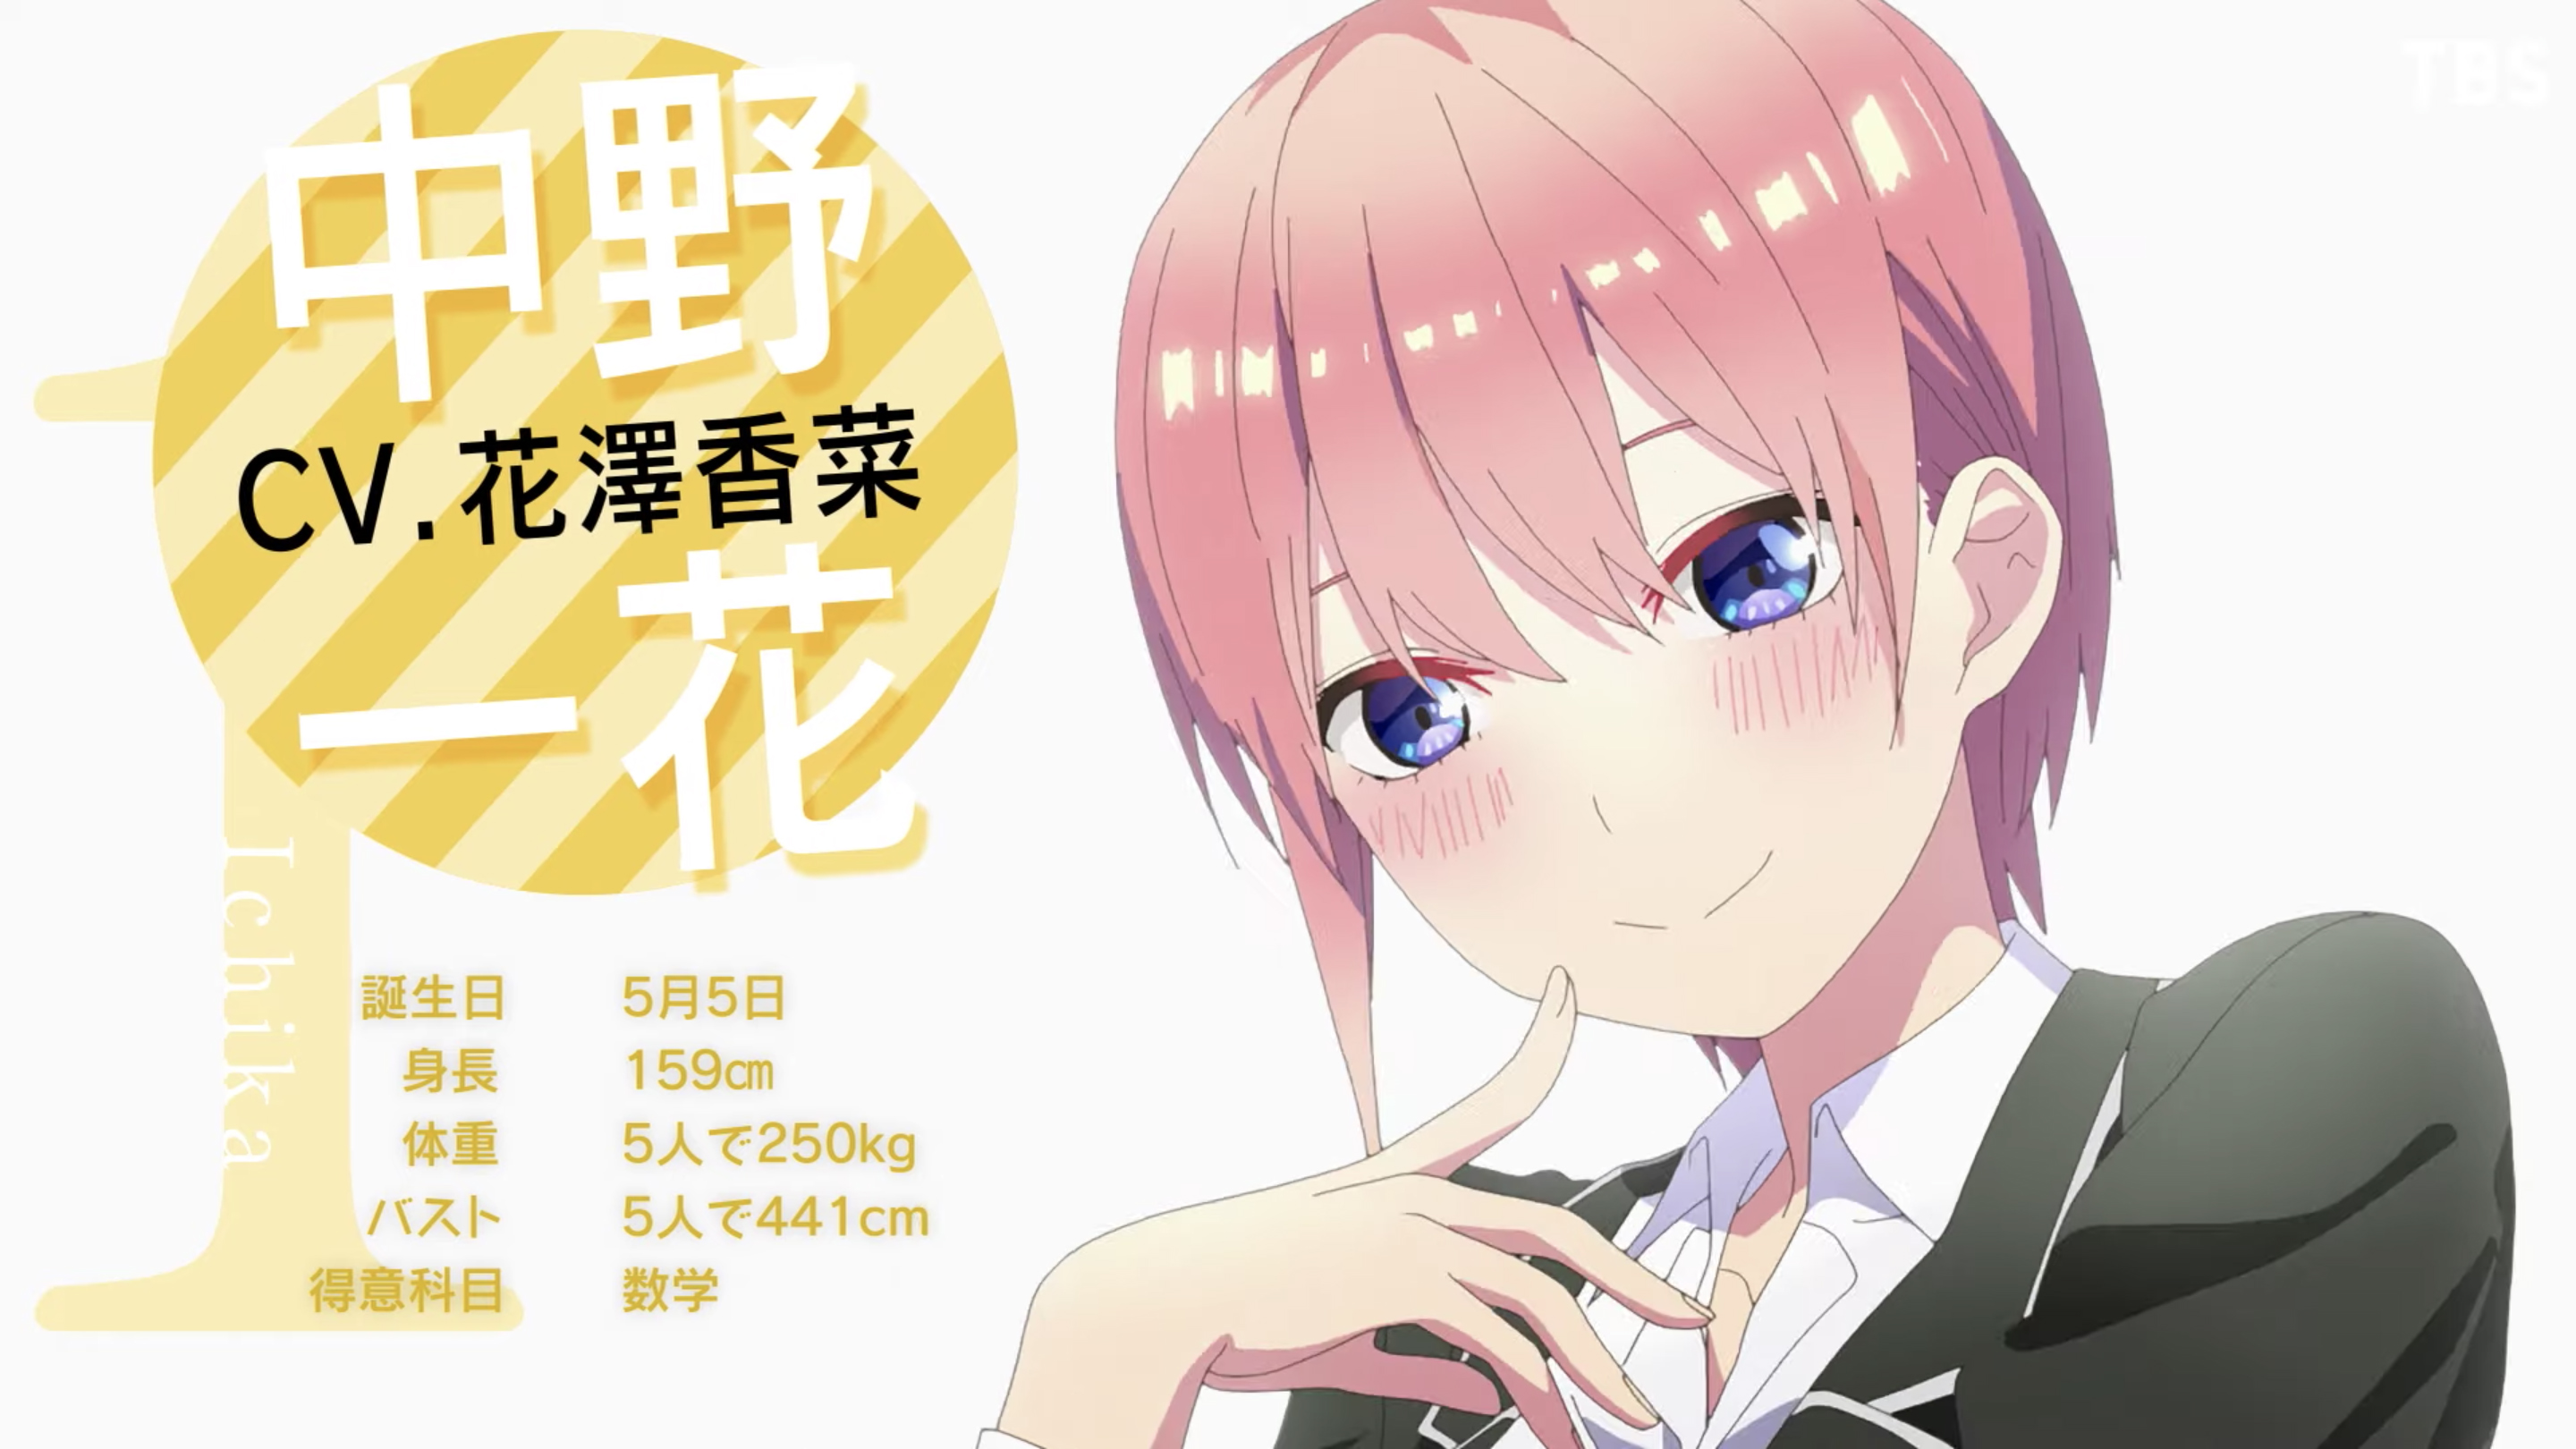 Crunchyroll - Sweet Flower Ichika is Previewed in New The Quintessential  Quintuplets Season 2 TV Anime Trailer